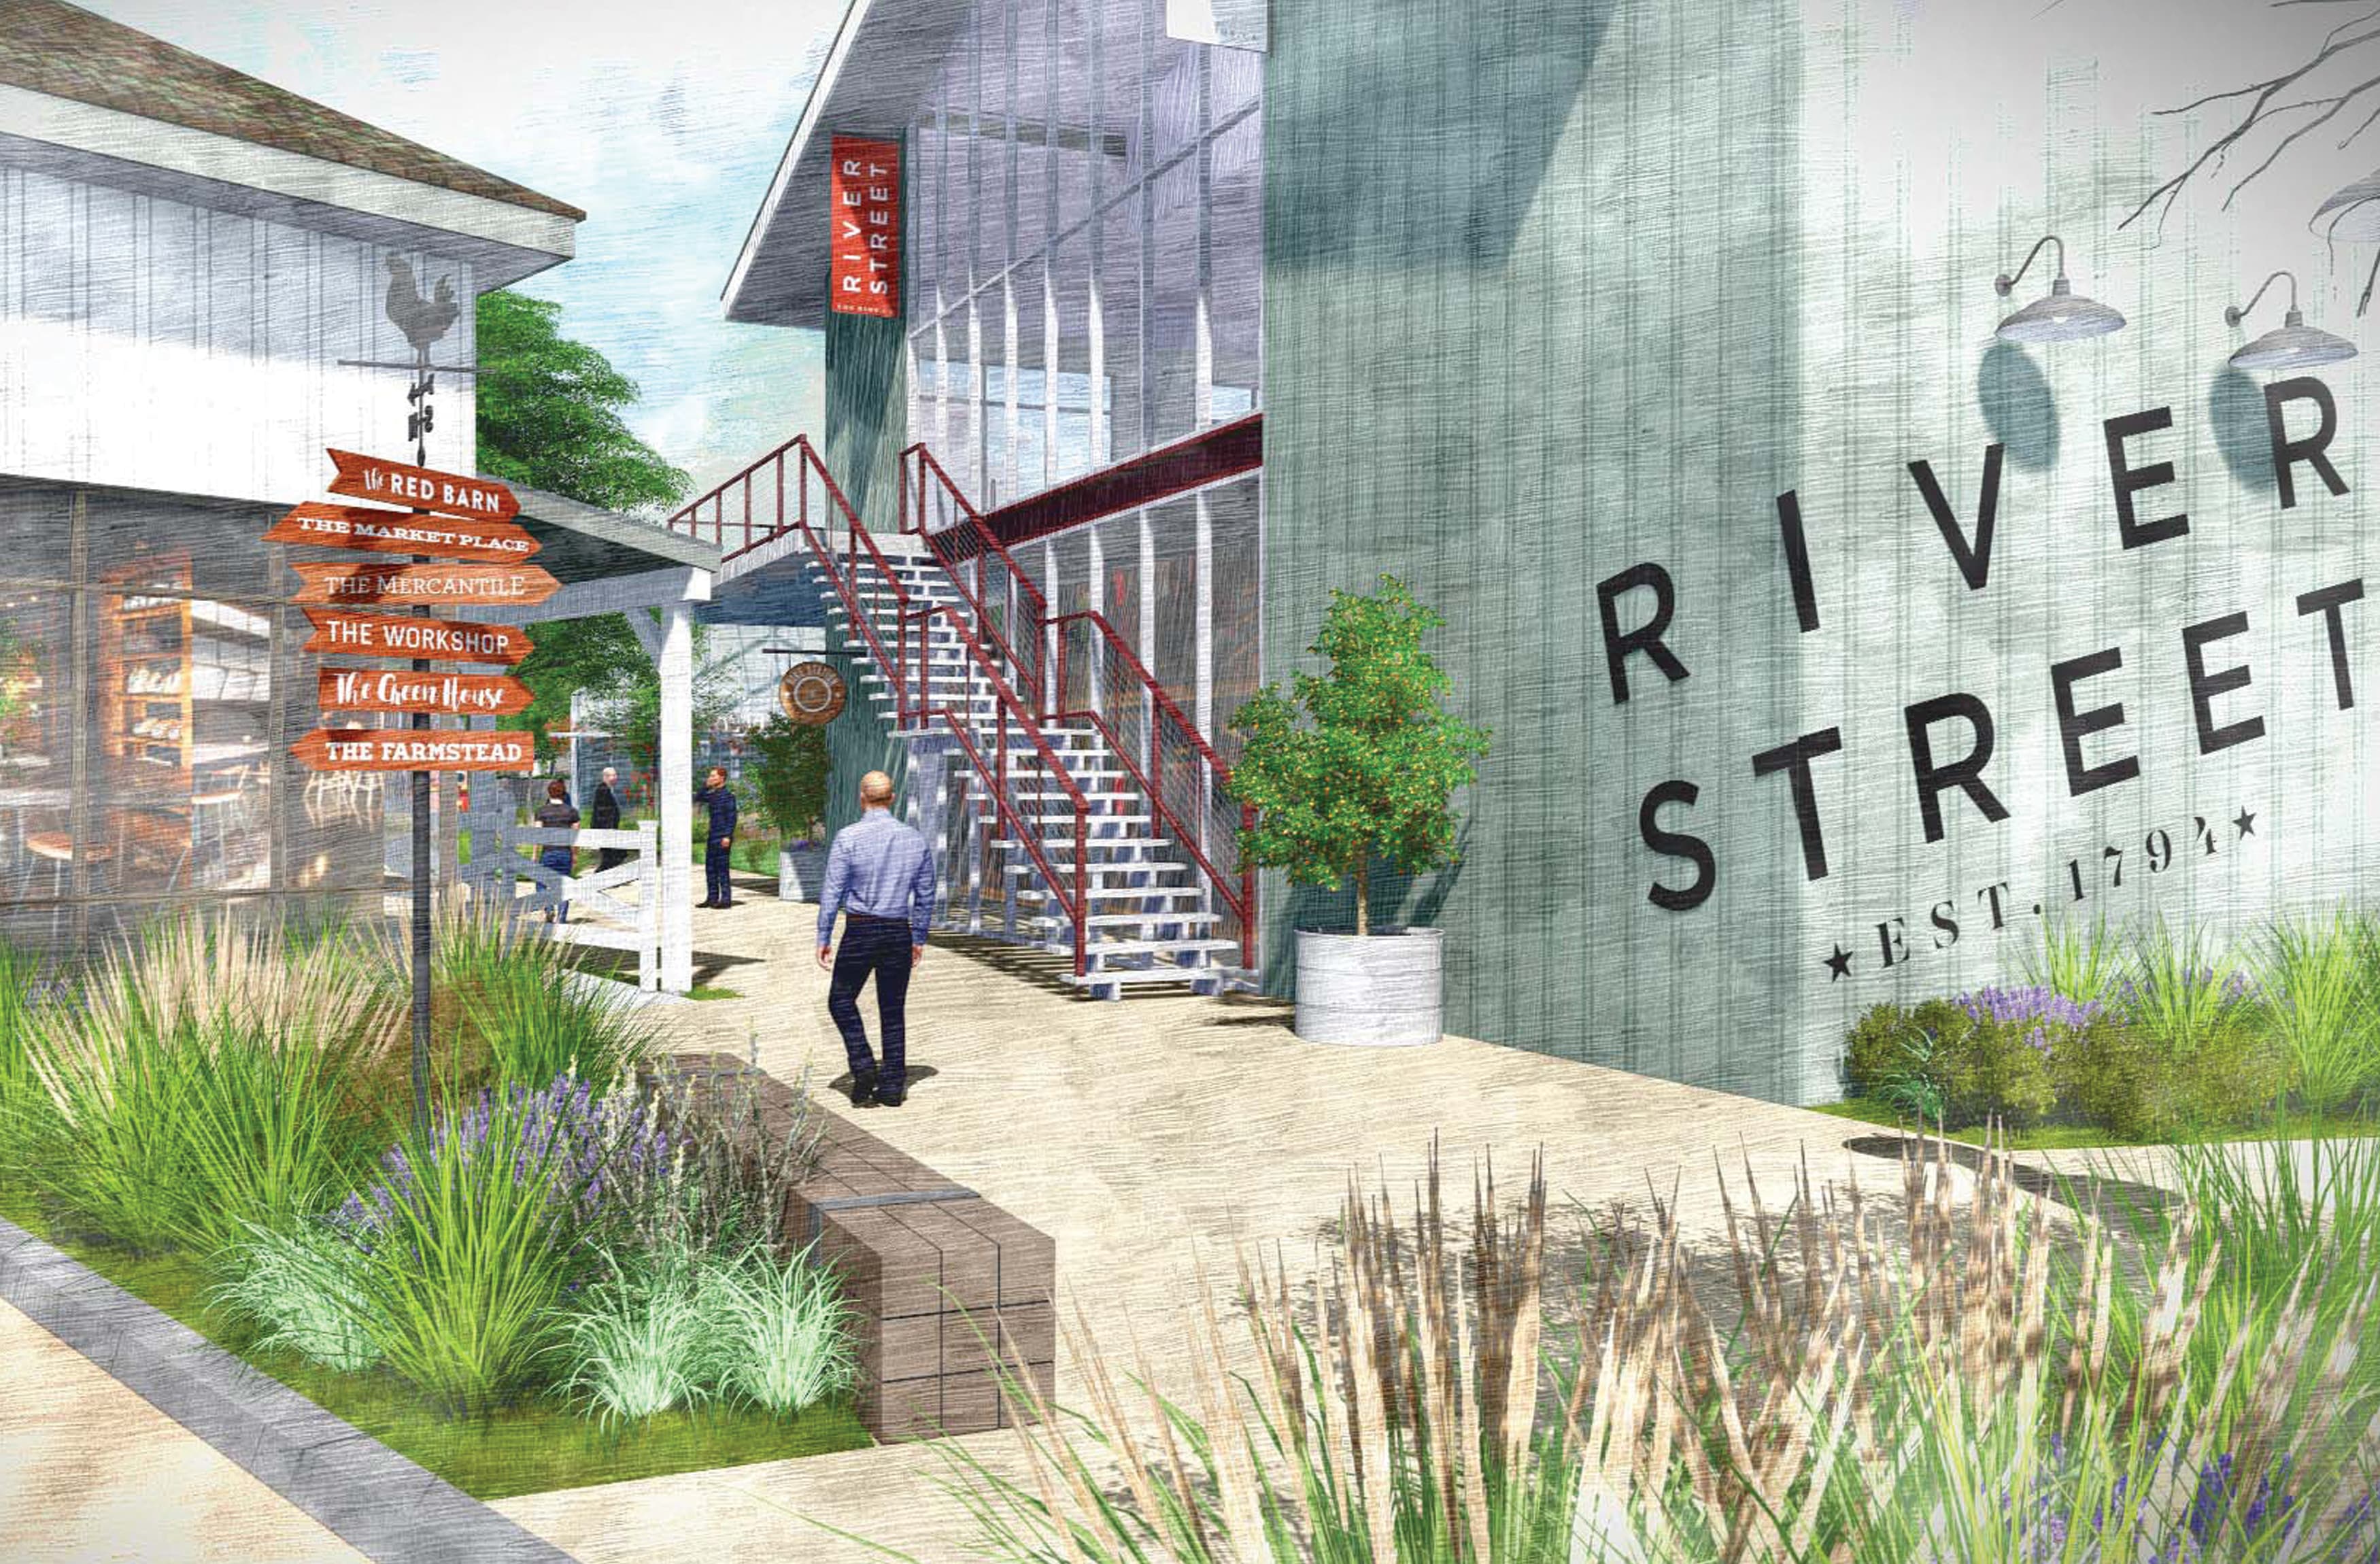 River Streeet, a mixed-use project in the historic and cultural center of San Juan Capistrano, California. RSM Design prepared wayfinding solutions and graphic architecture applications.